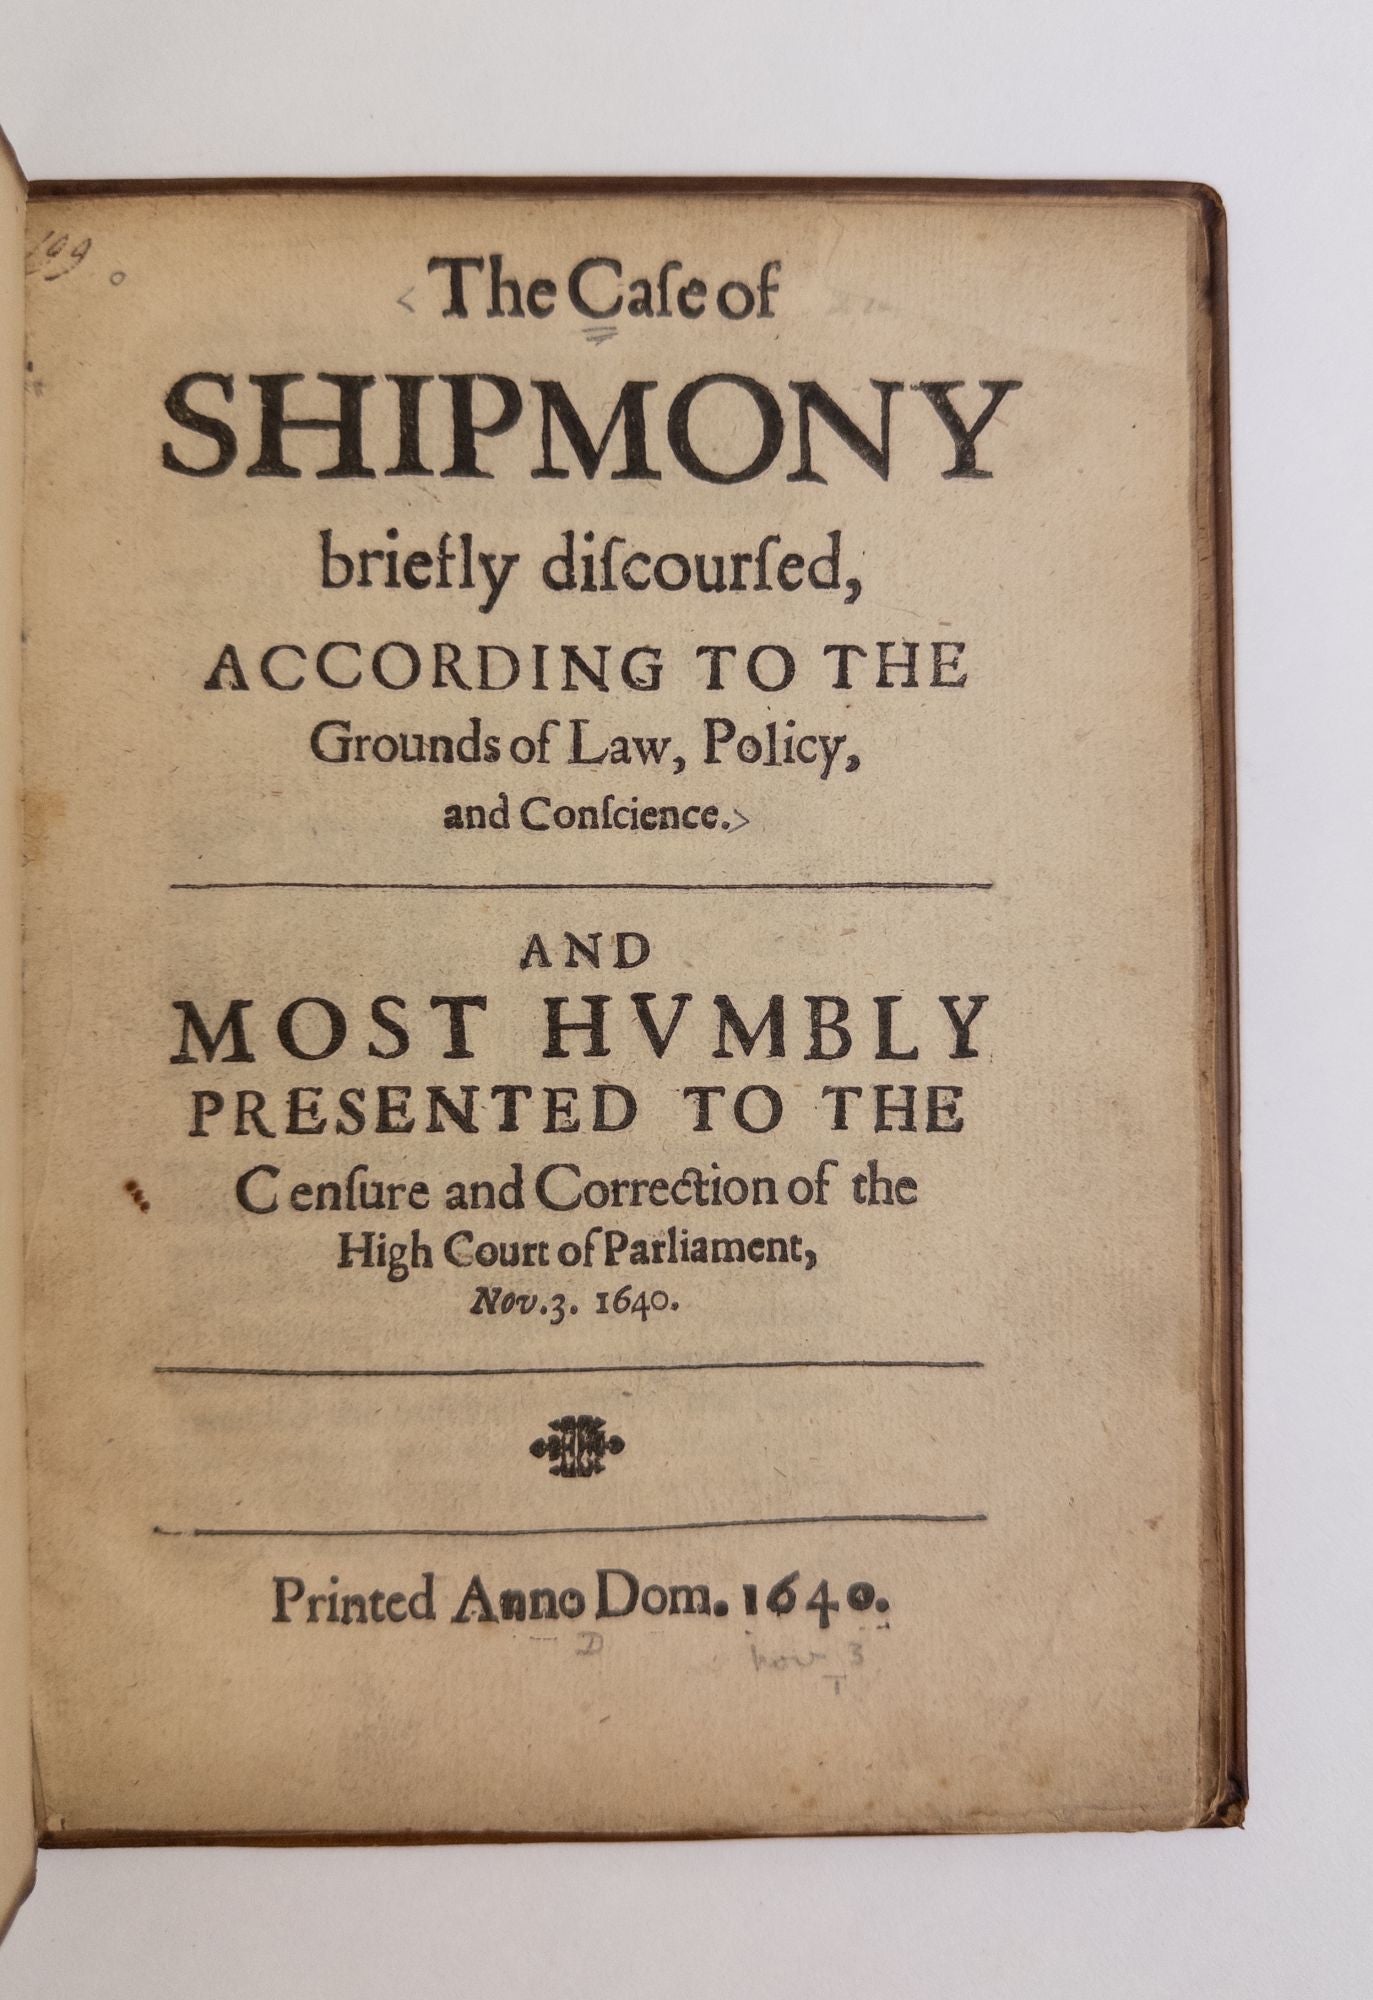 Product Image for THE CASE OF SHIPMONY, BRIEFLY DISCOURSED ACCORDING TO THE GROUNDS OF LAW, POLICY, AND CONSCIENCE